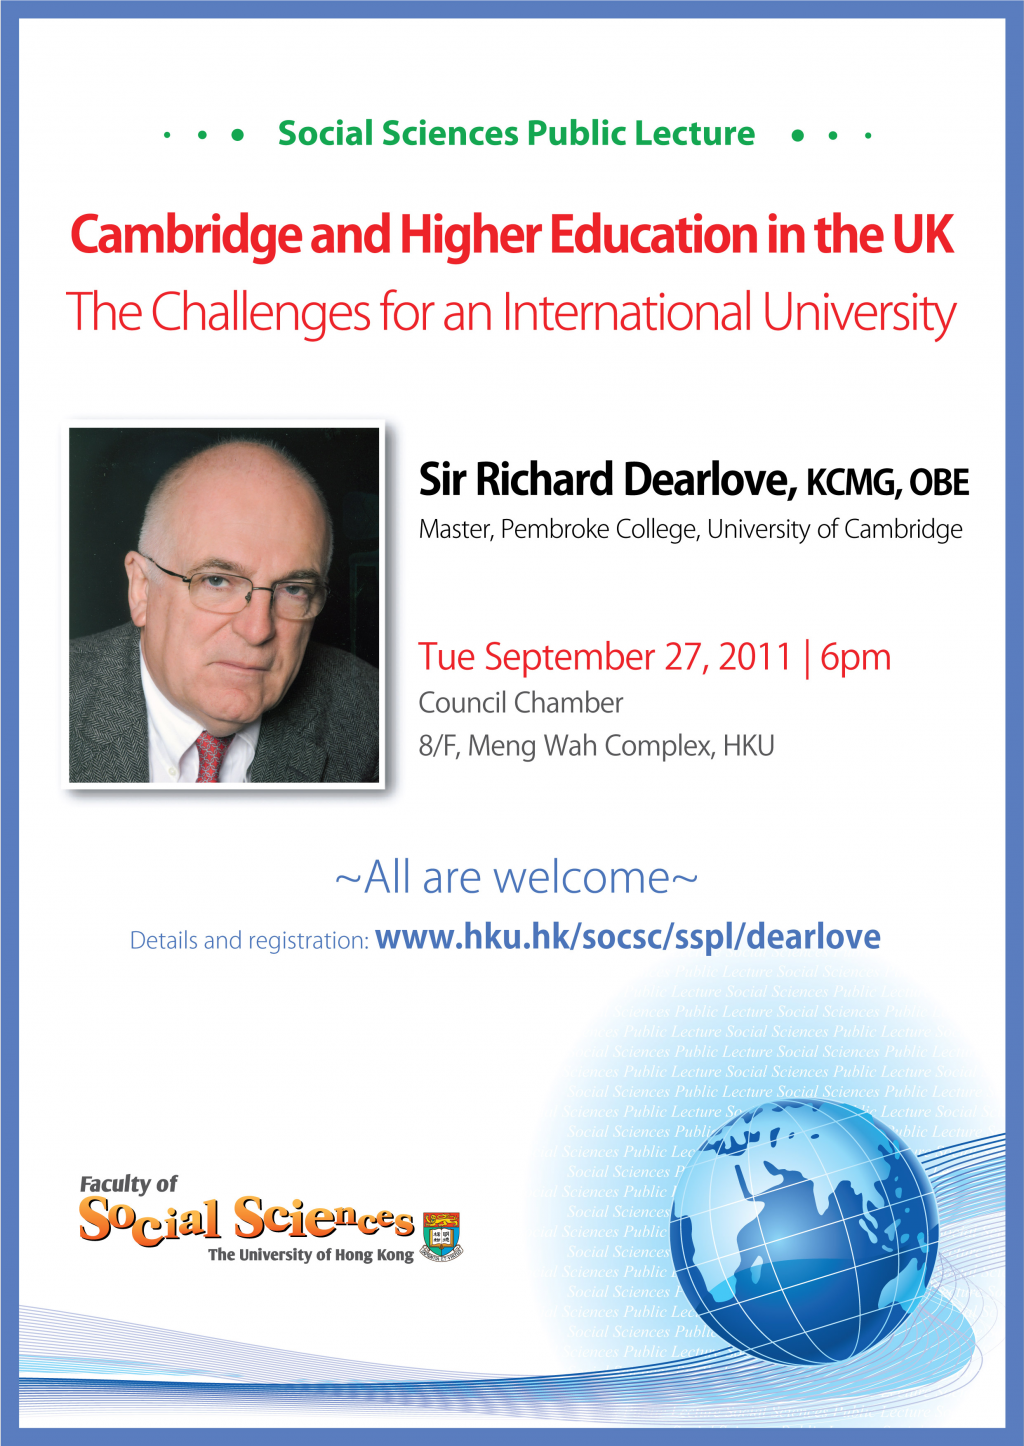 Social Sciences Public Lecture - Cambridge and Higher Education in the UK: The Challenges for an International University